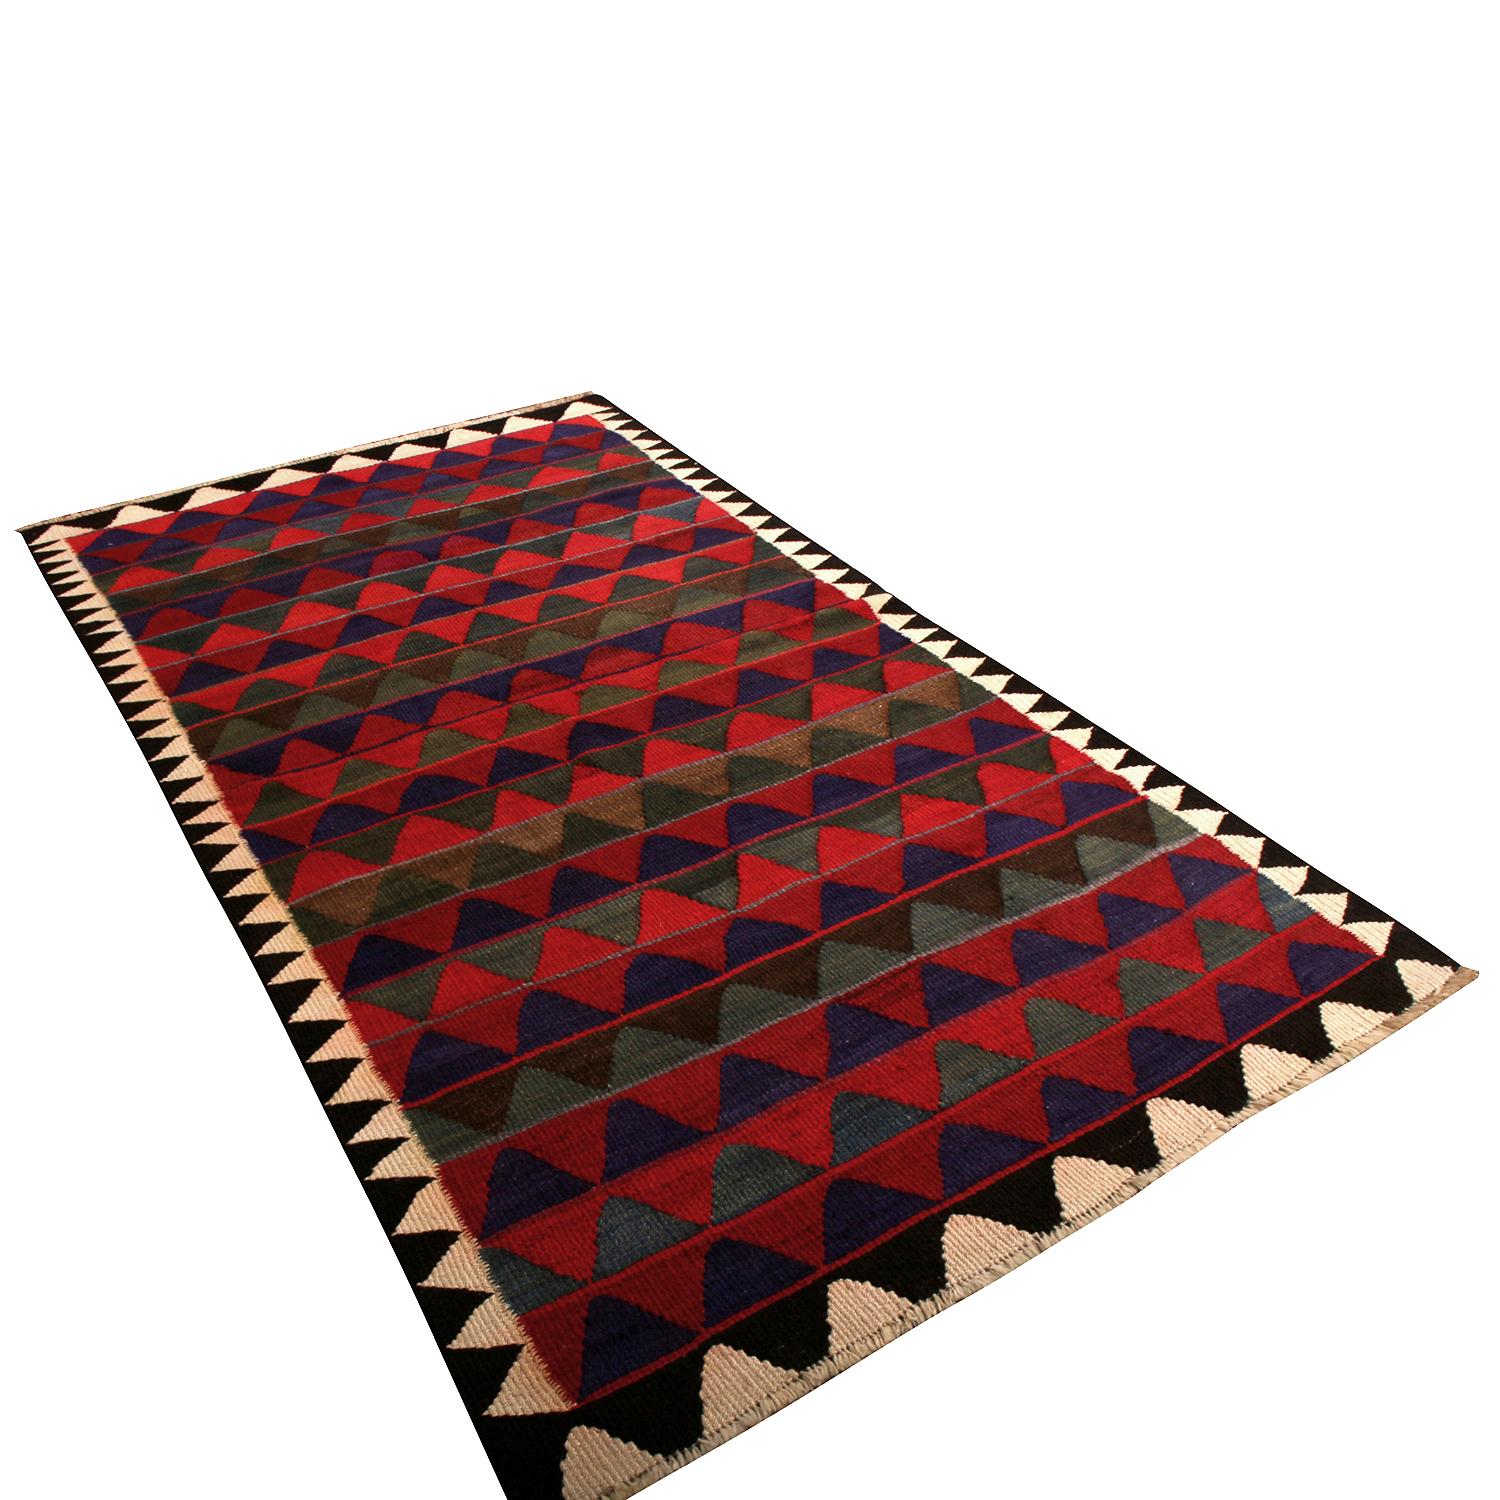 Handwoven in wool originating from Persia between 1950-1960, this vintage midcentury Kurdish Kilim rug enjoys both an appealing, versatile large size as well as a skillful play of colorway and pattern the most celebrated items of this Classic rug